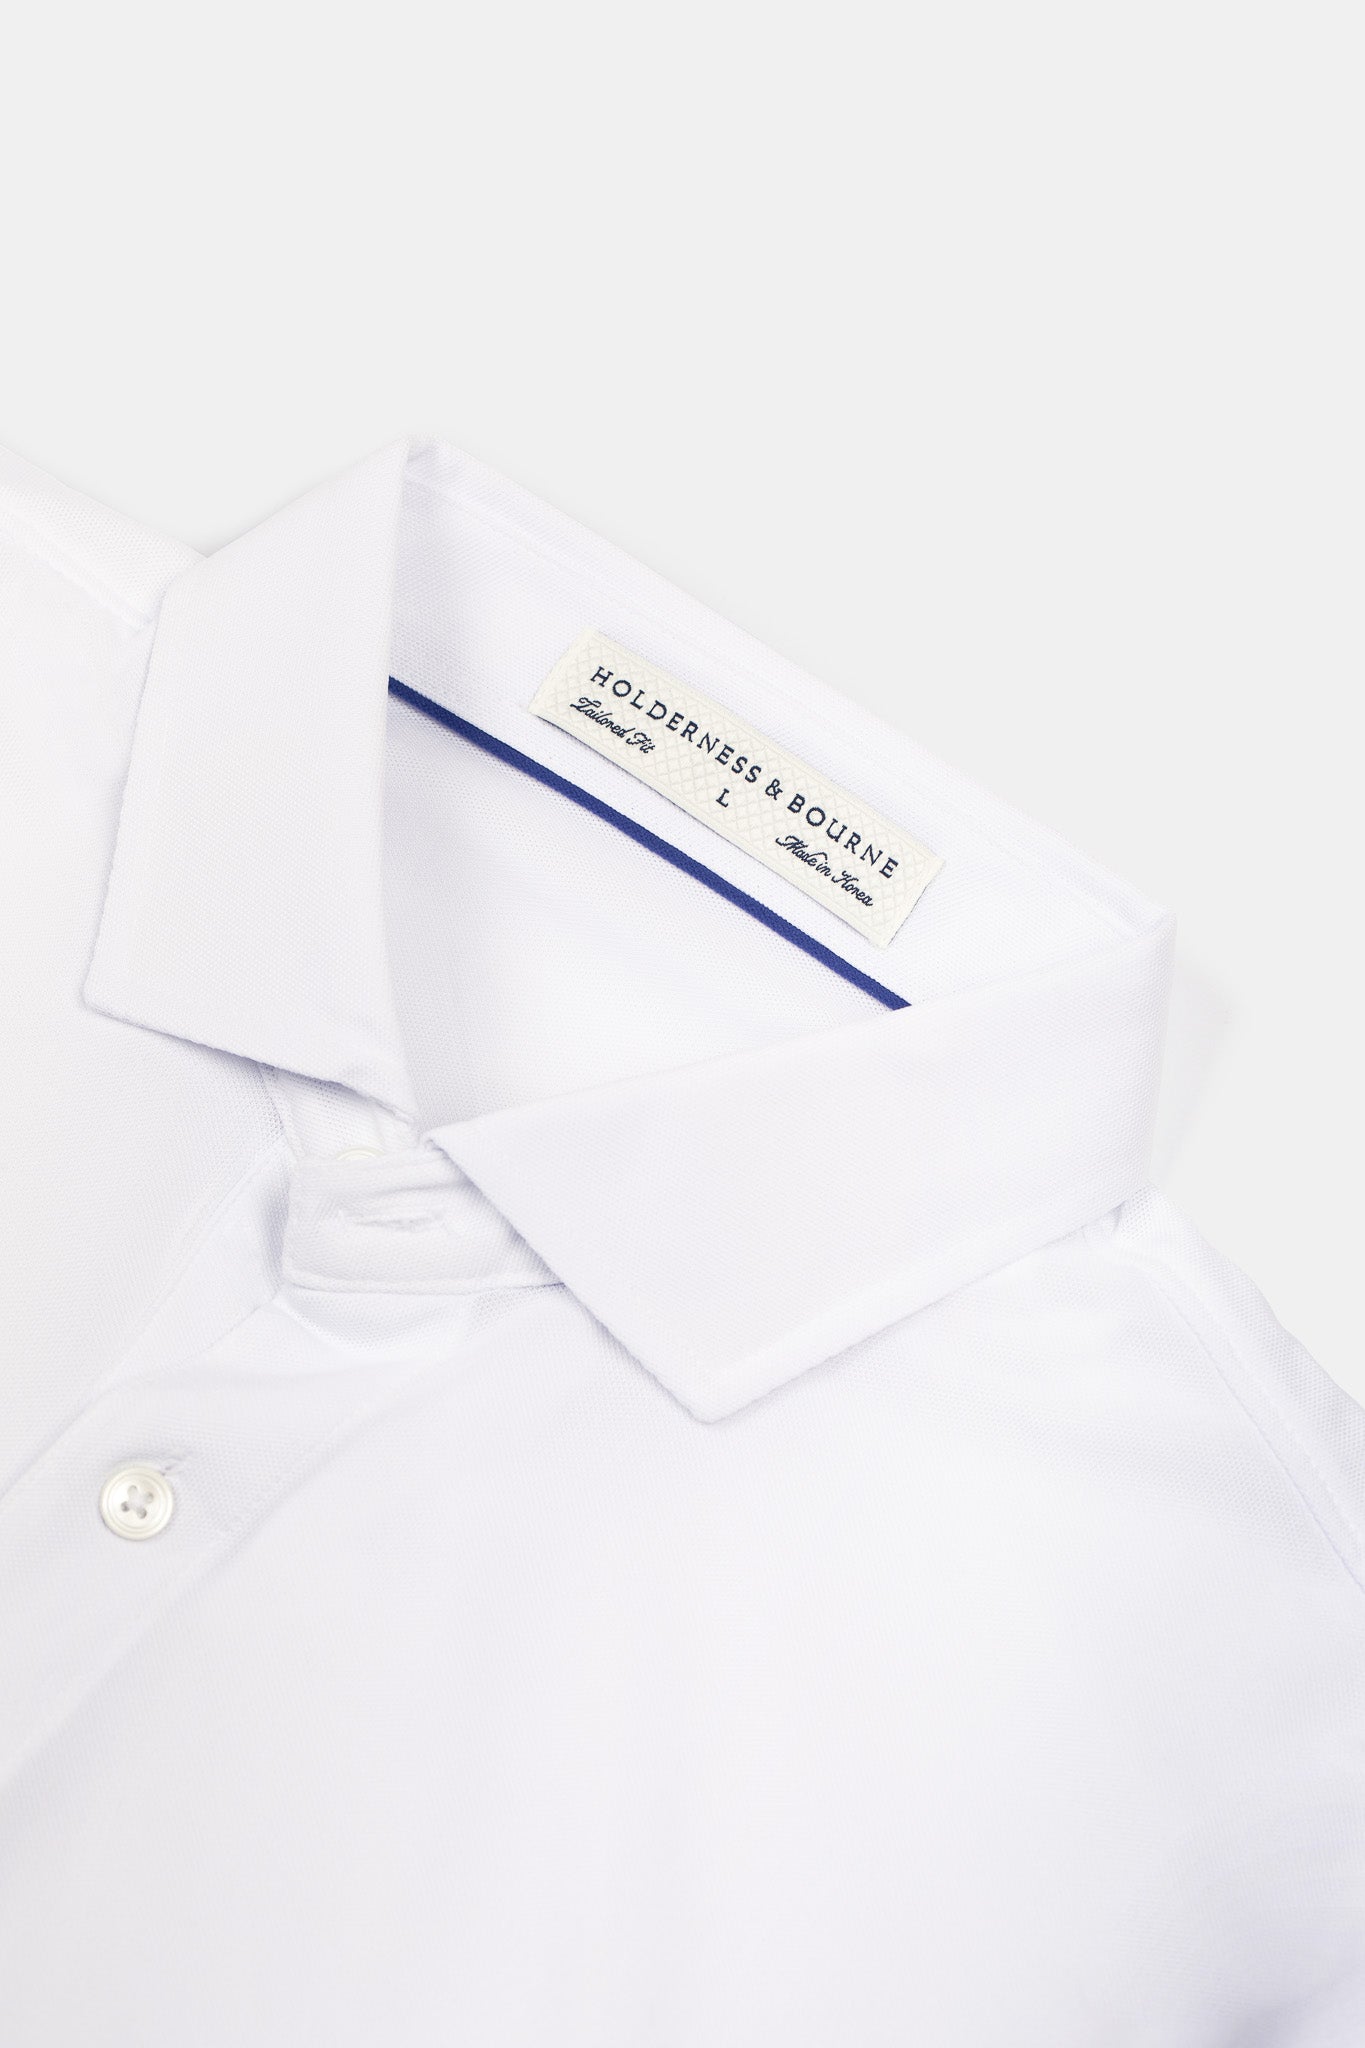 Holderness & Bourne Performance Polo in White